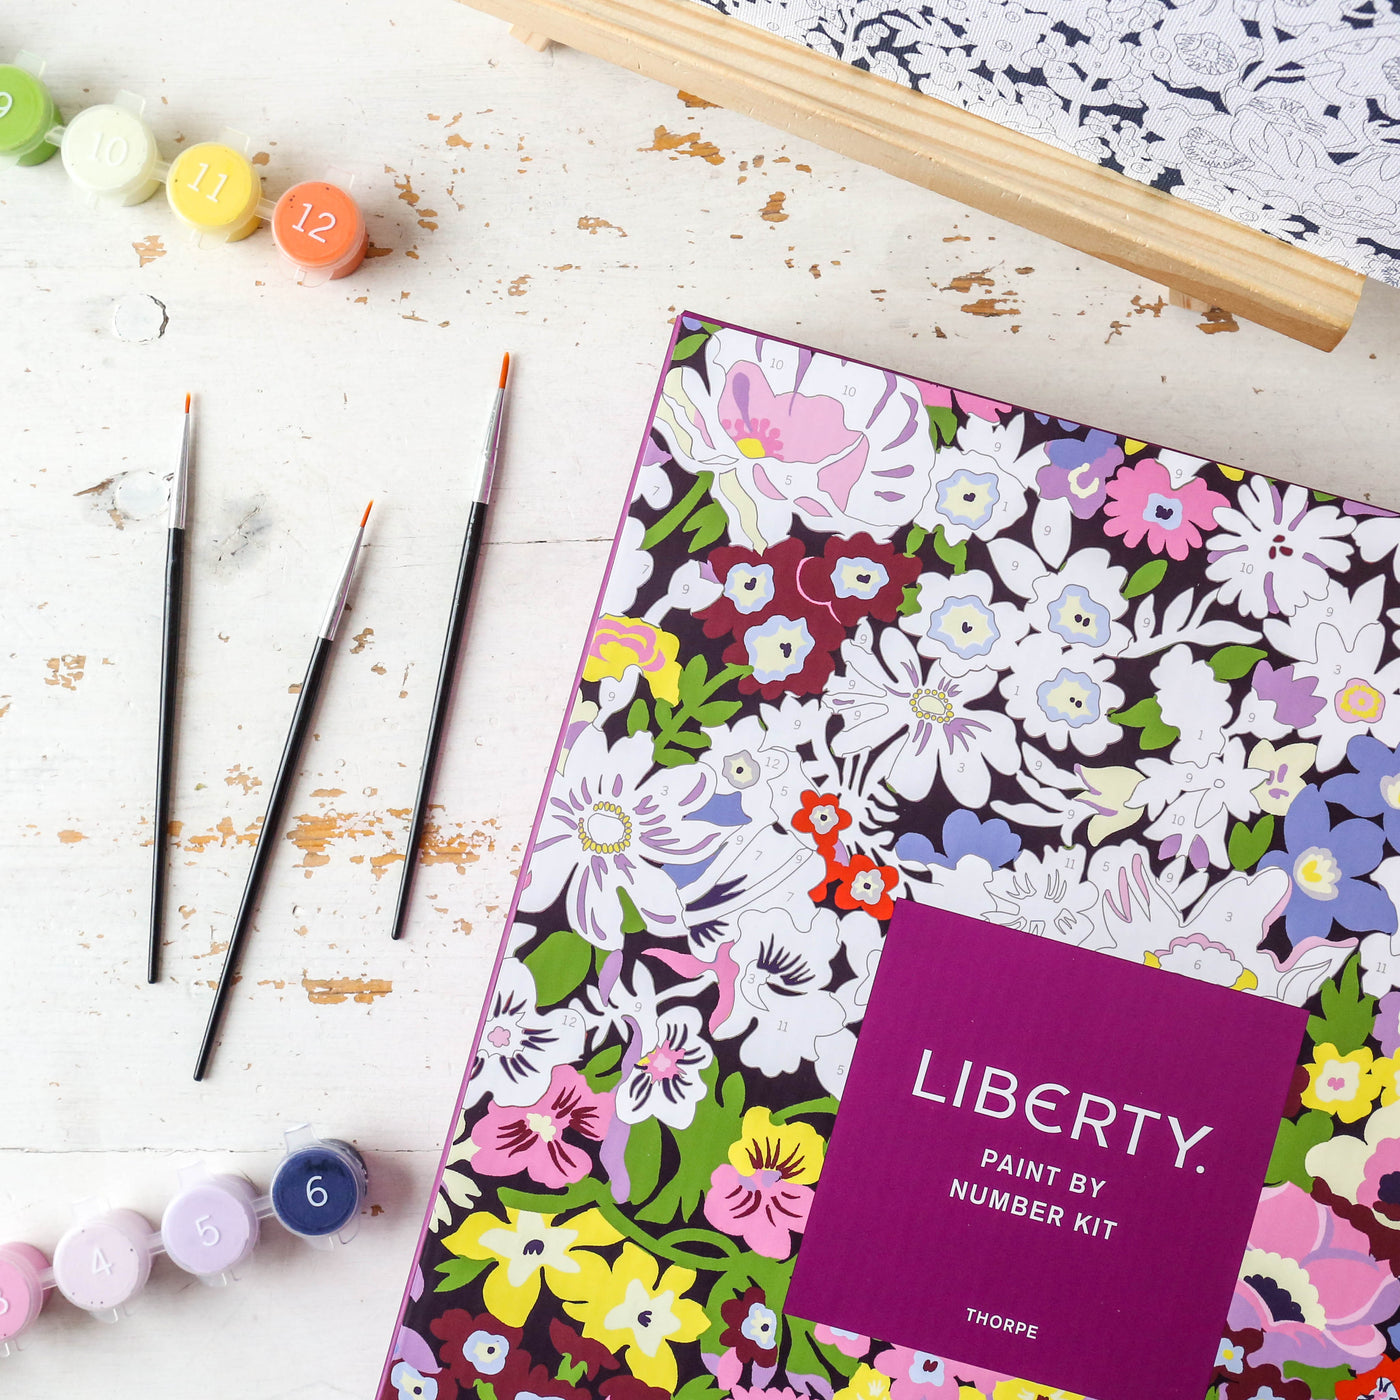 Liberty Paint By Number Kit - Thorpe